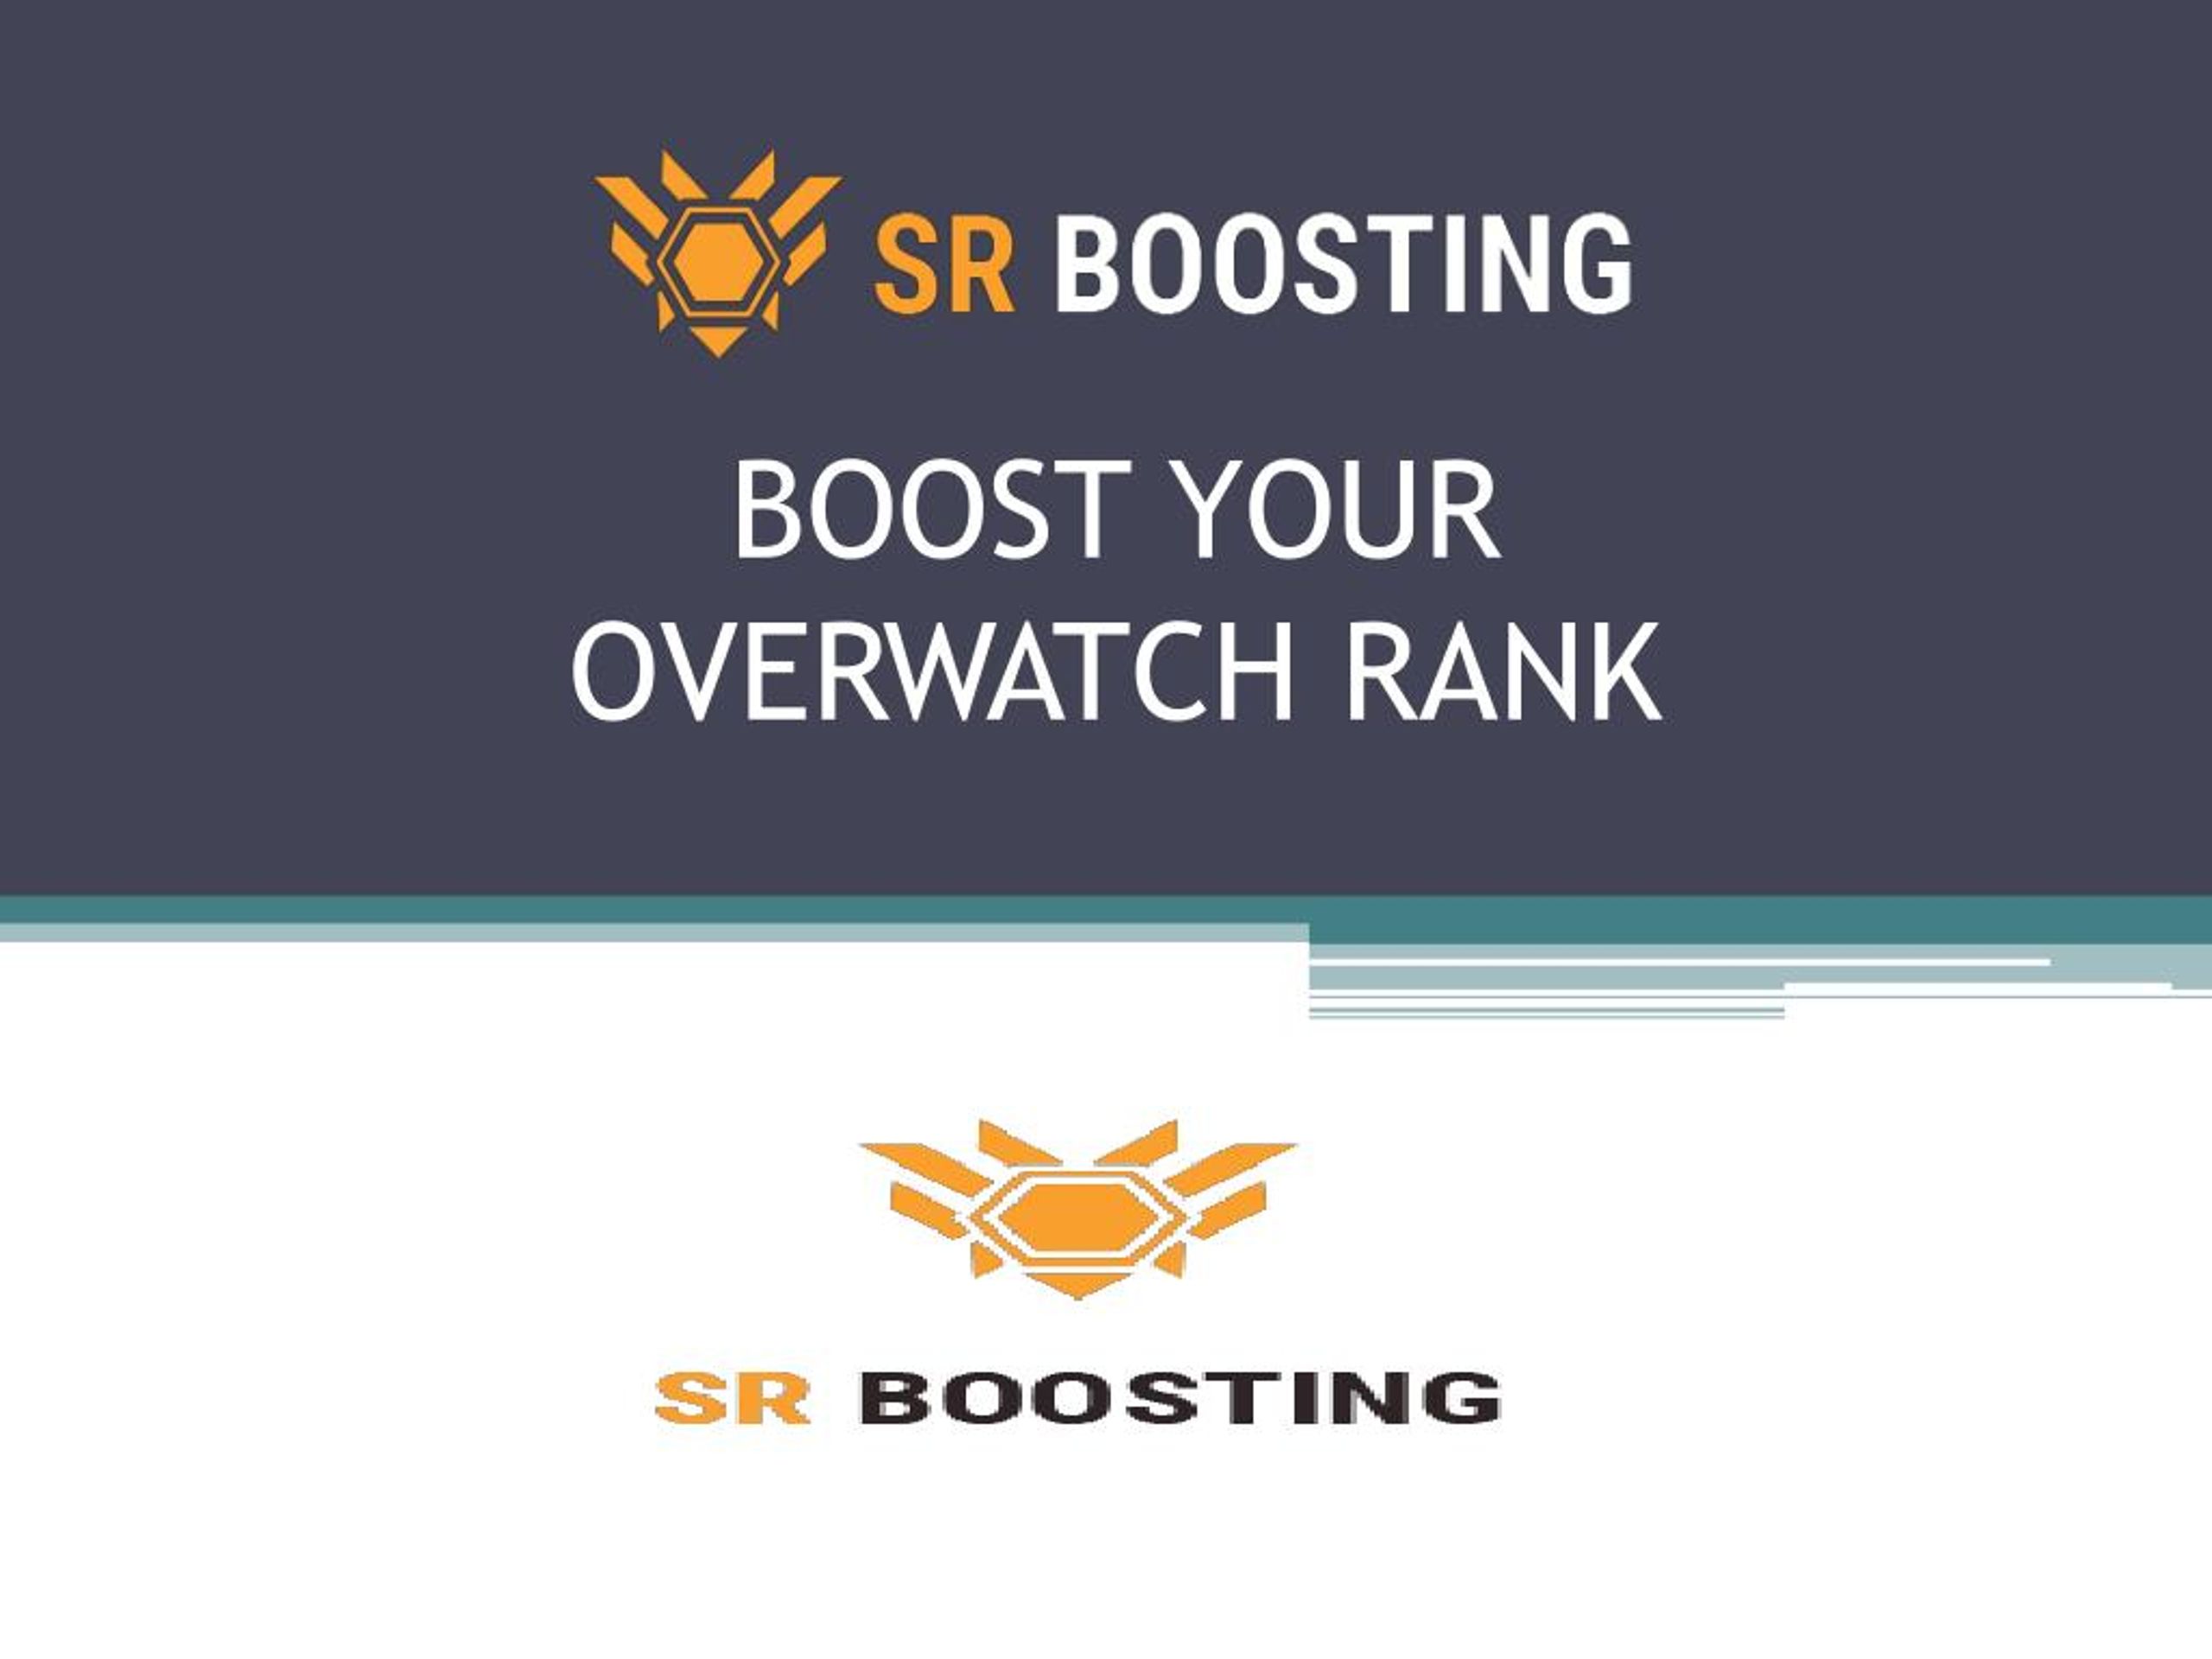 Overwatch Boosting - Skill Rating Boost